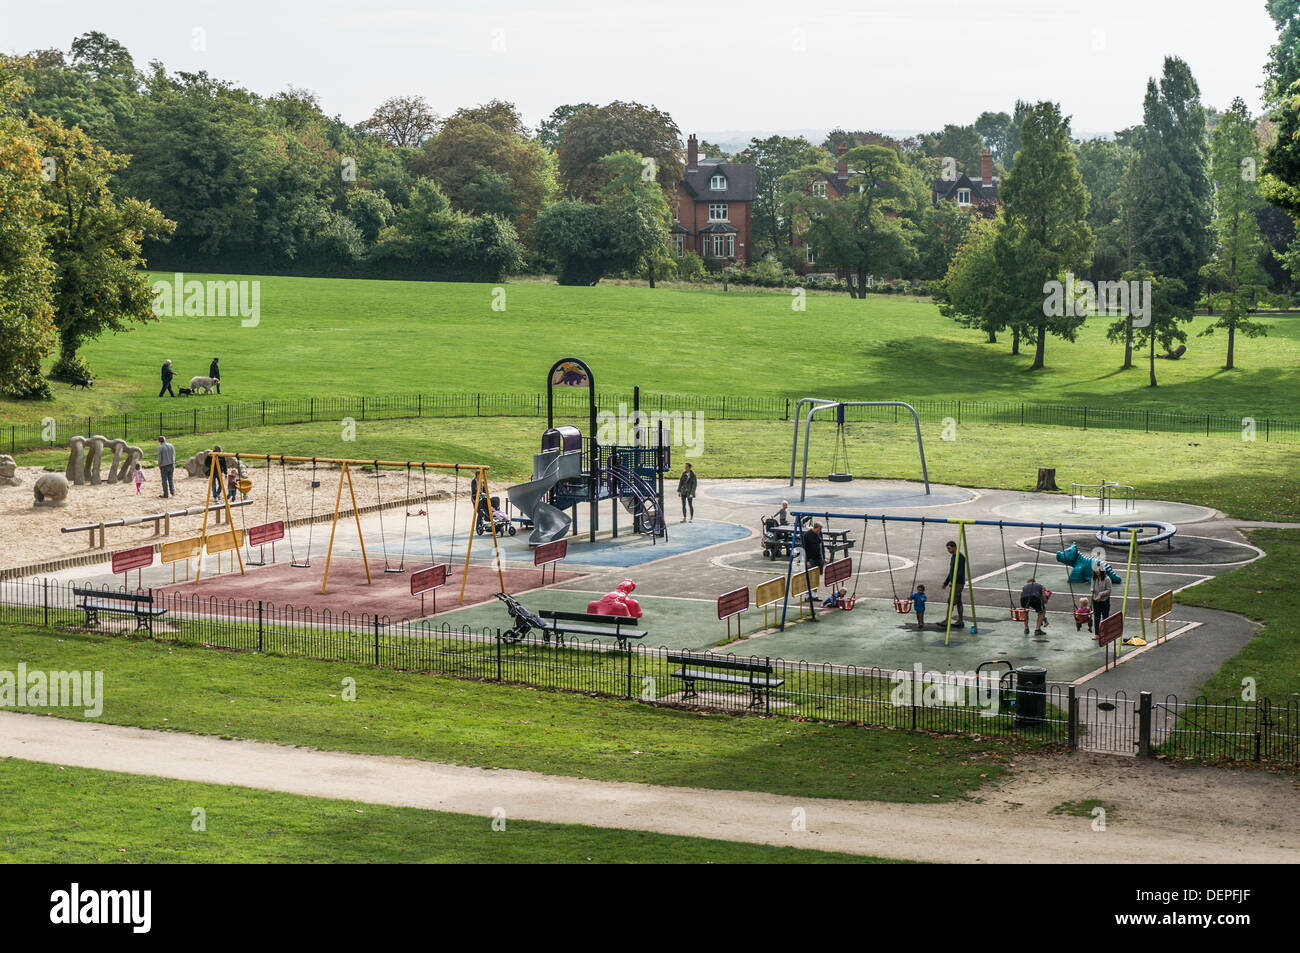 A busy children’s playground / play area with parents and young children enjoying a sunny autumn day in Crystal Palace park, London, England, UK. Stock Photo